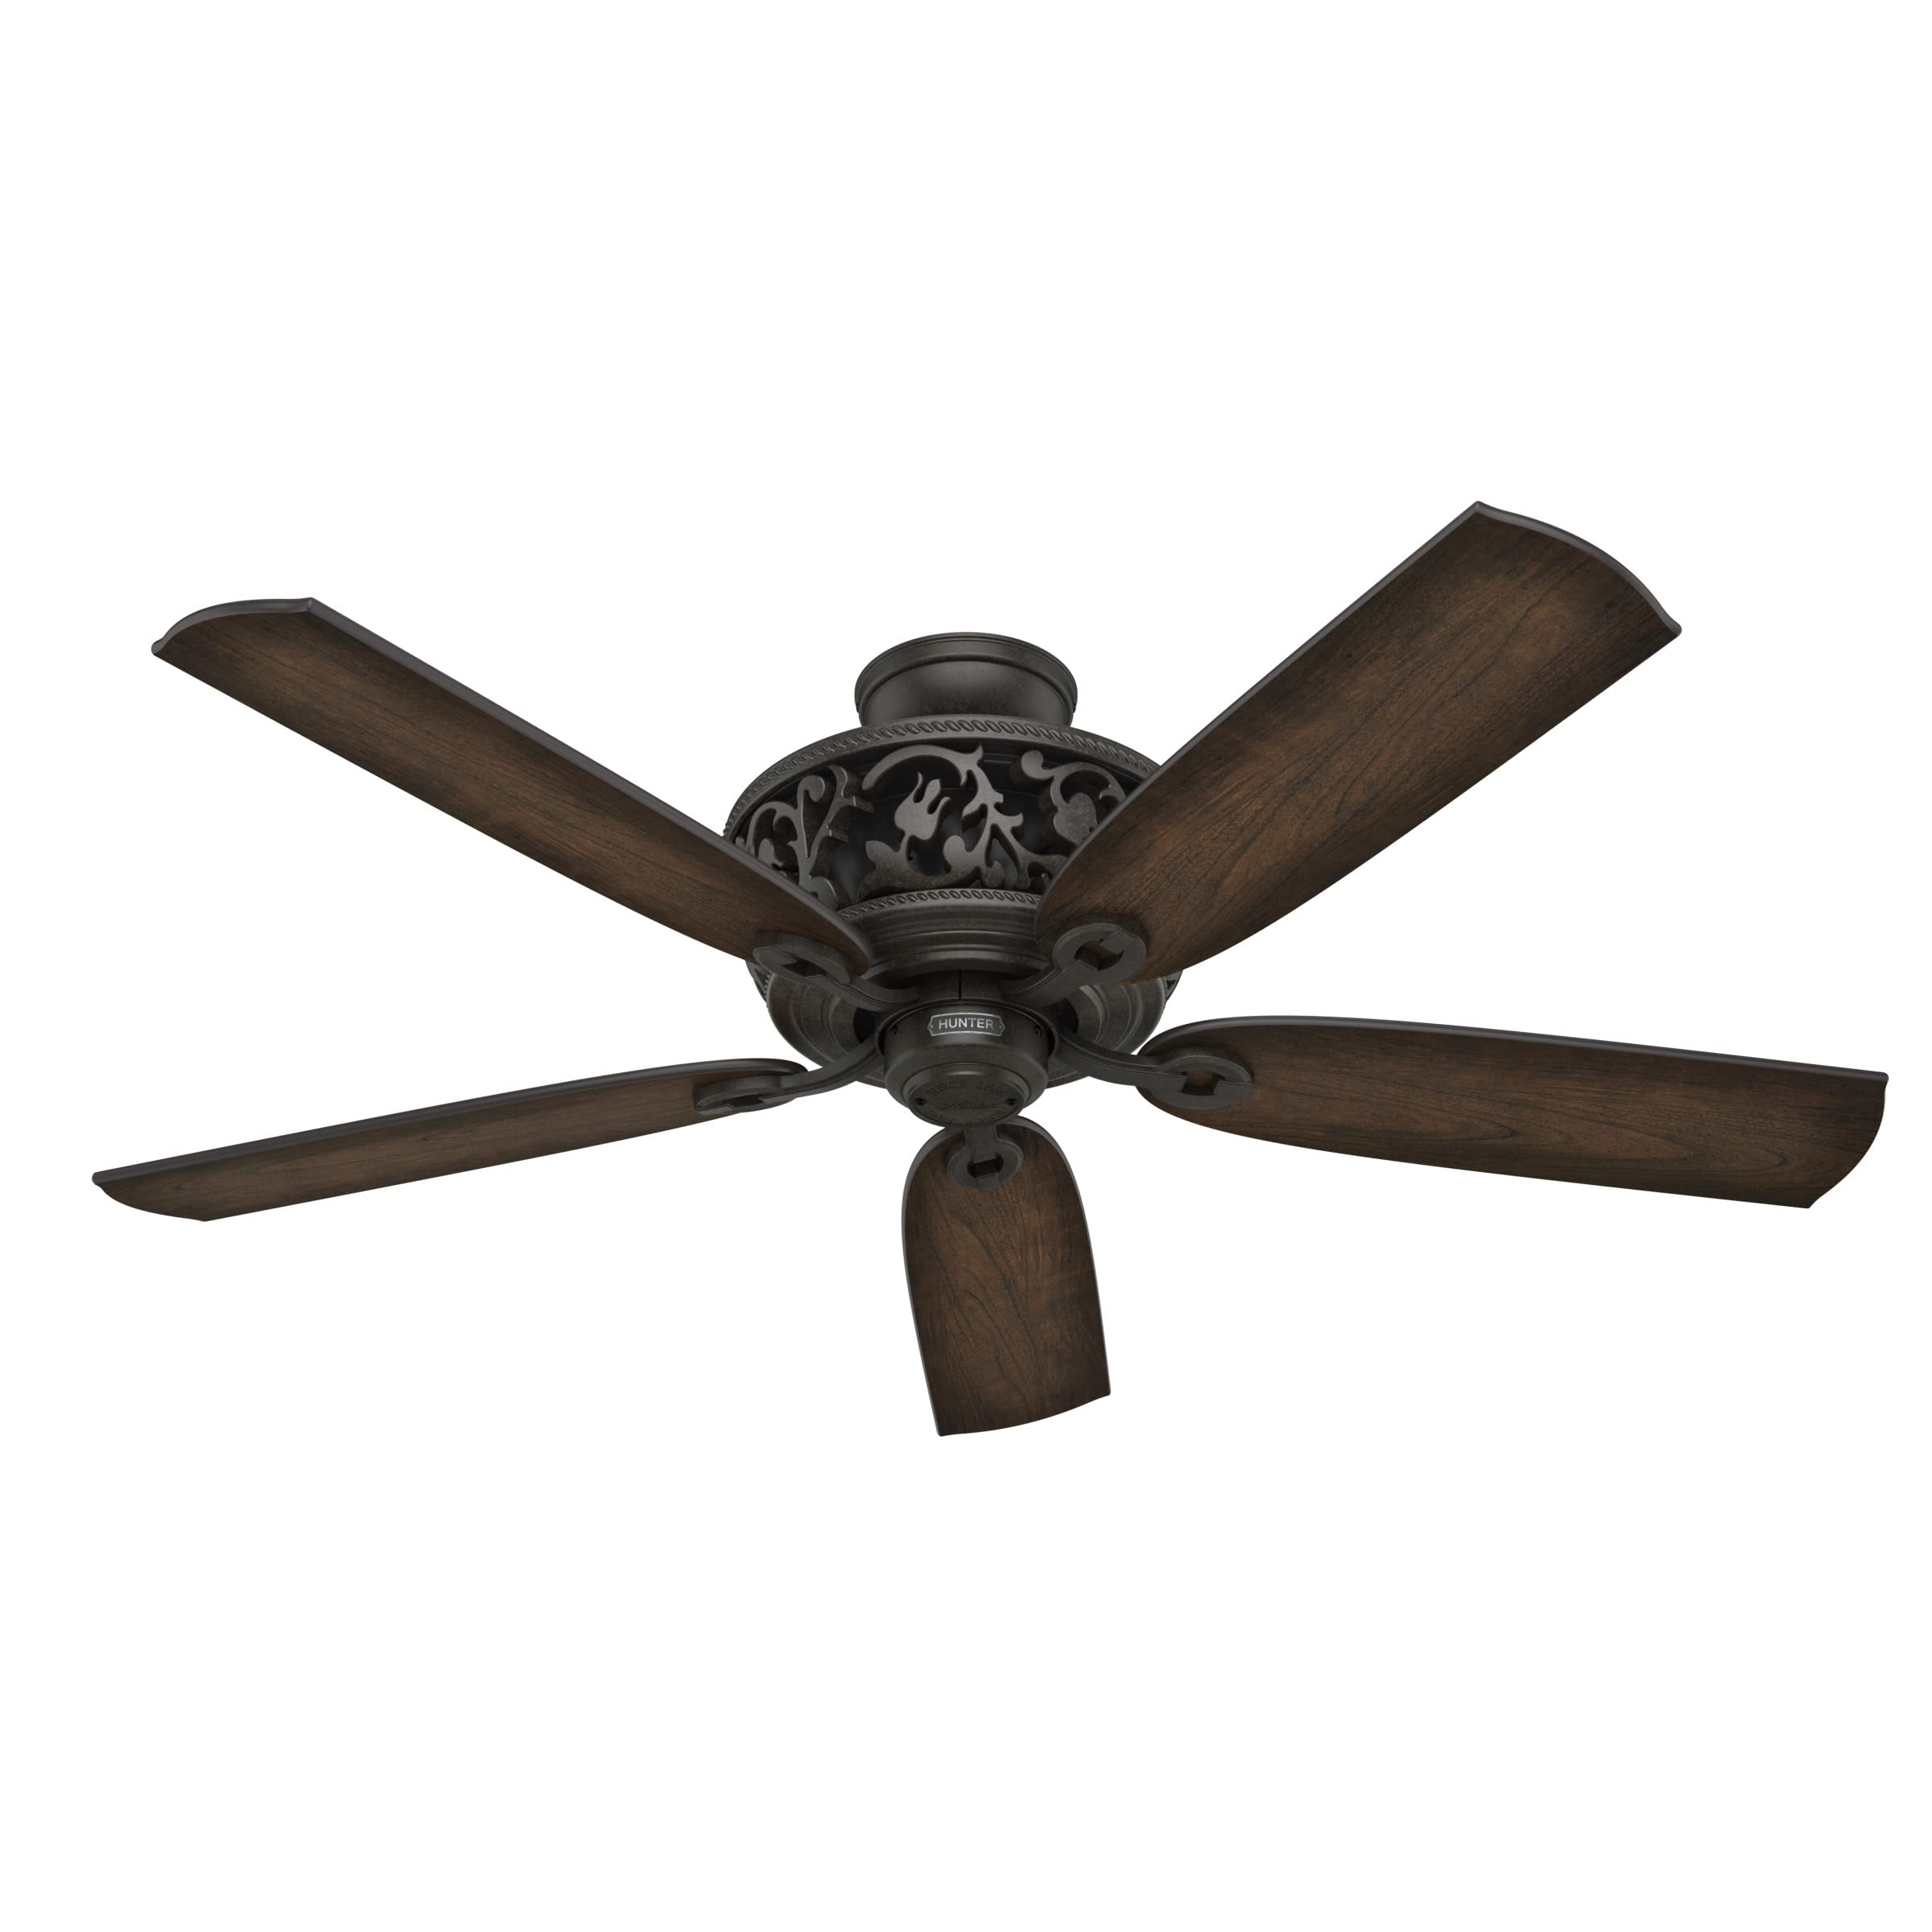 Hunter Fan Company, 59546, 54 inch Promenade Brittany Bronze Ceiling Fan with LED Light Kit and Handheld Remote